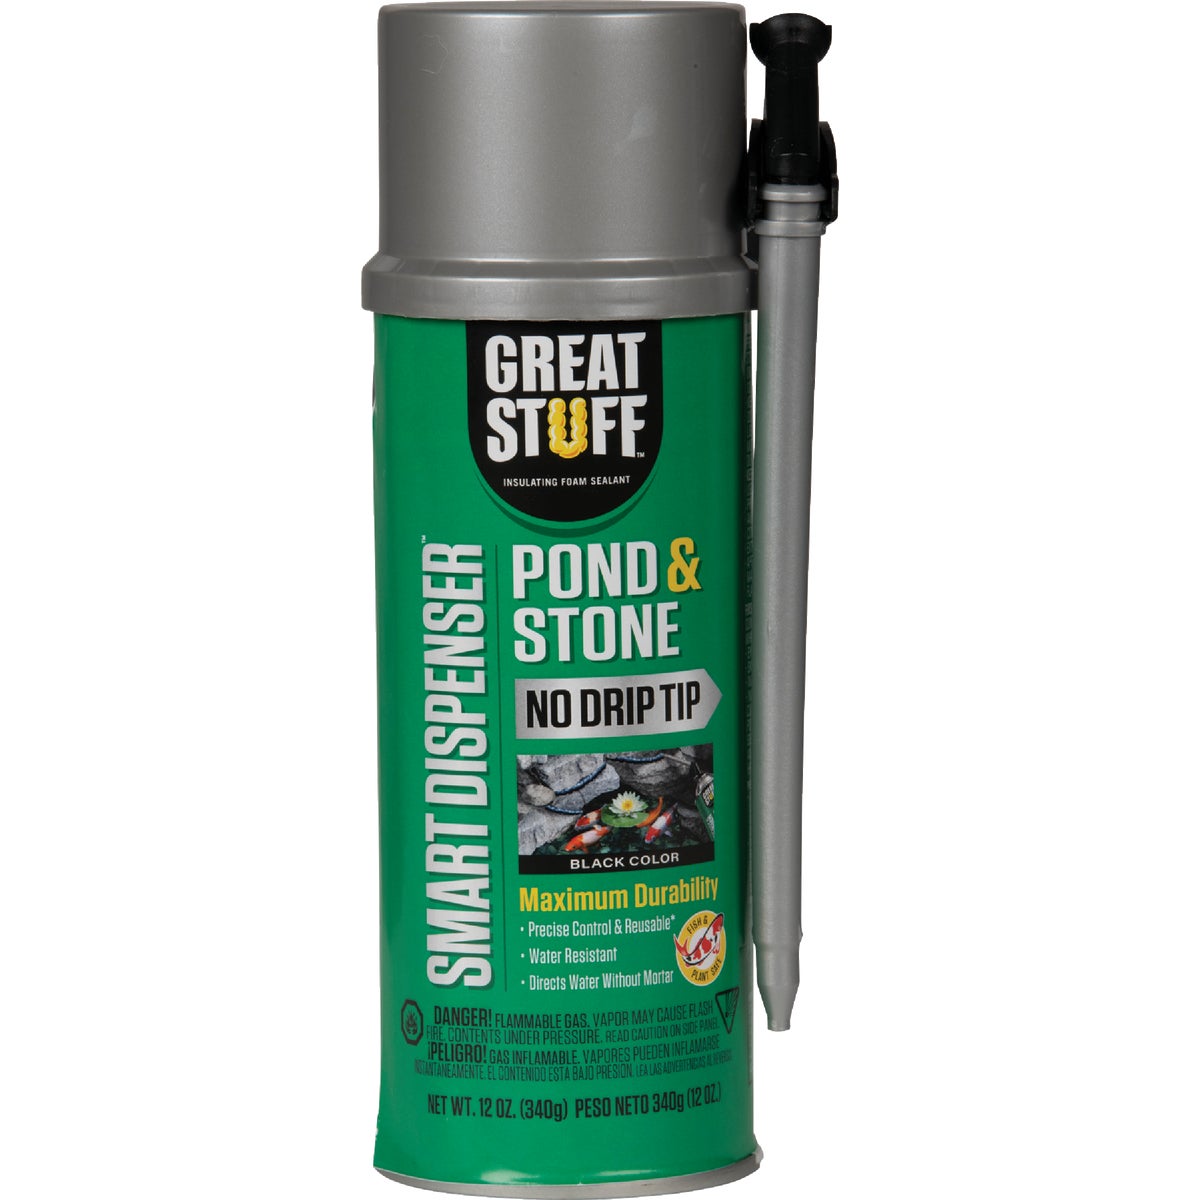 Item 273812, GREAT STUFF Pond &amp; Stone Filler, Sealer and Adhesive is a ready-to-use